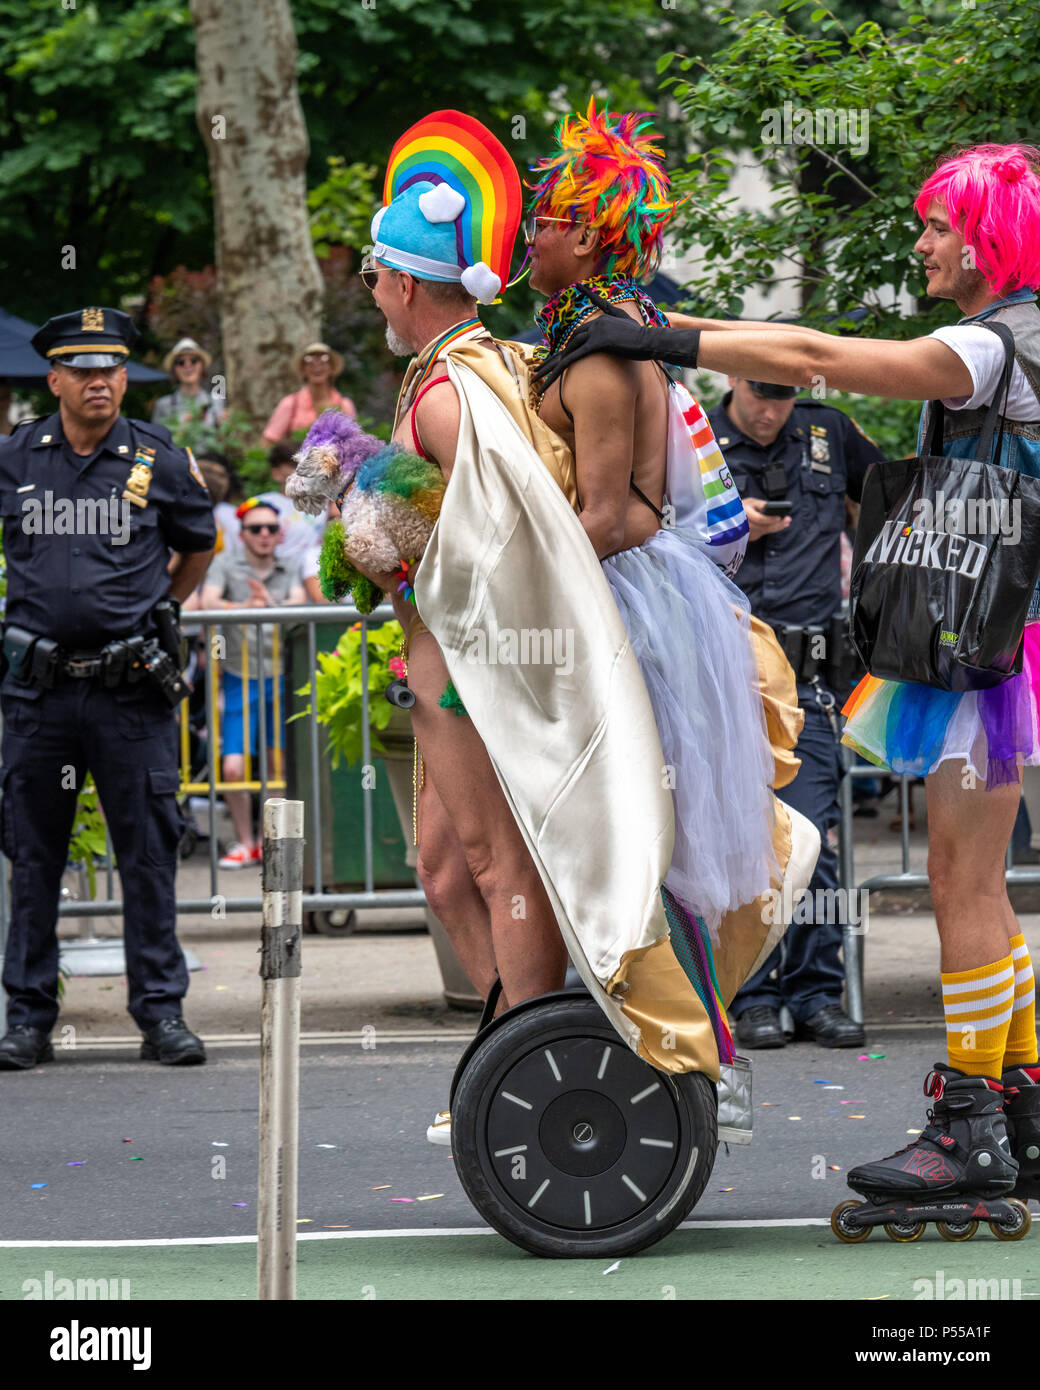 New York, USA, 24 June 2018. A policeman watches participants in the New York City Pride Parade 2018.  Photo by Enrique Shore Credit: Enrique Shore/Alamy Live News Stock Photo